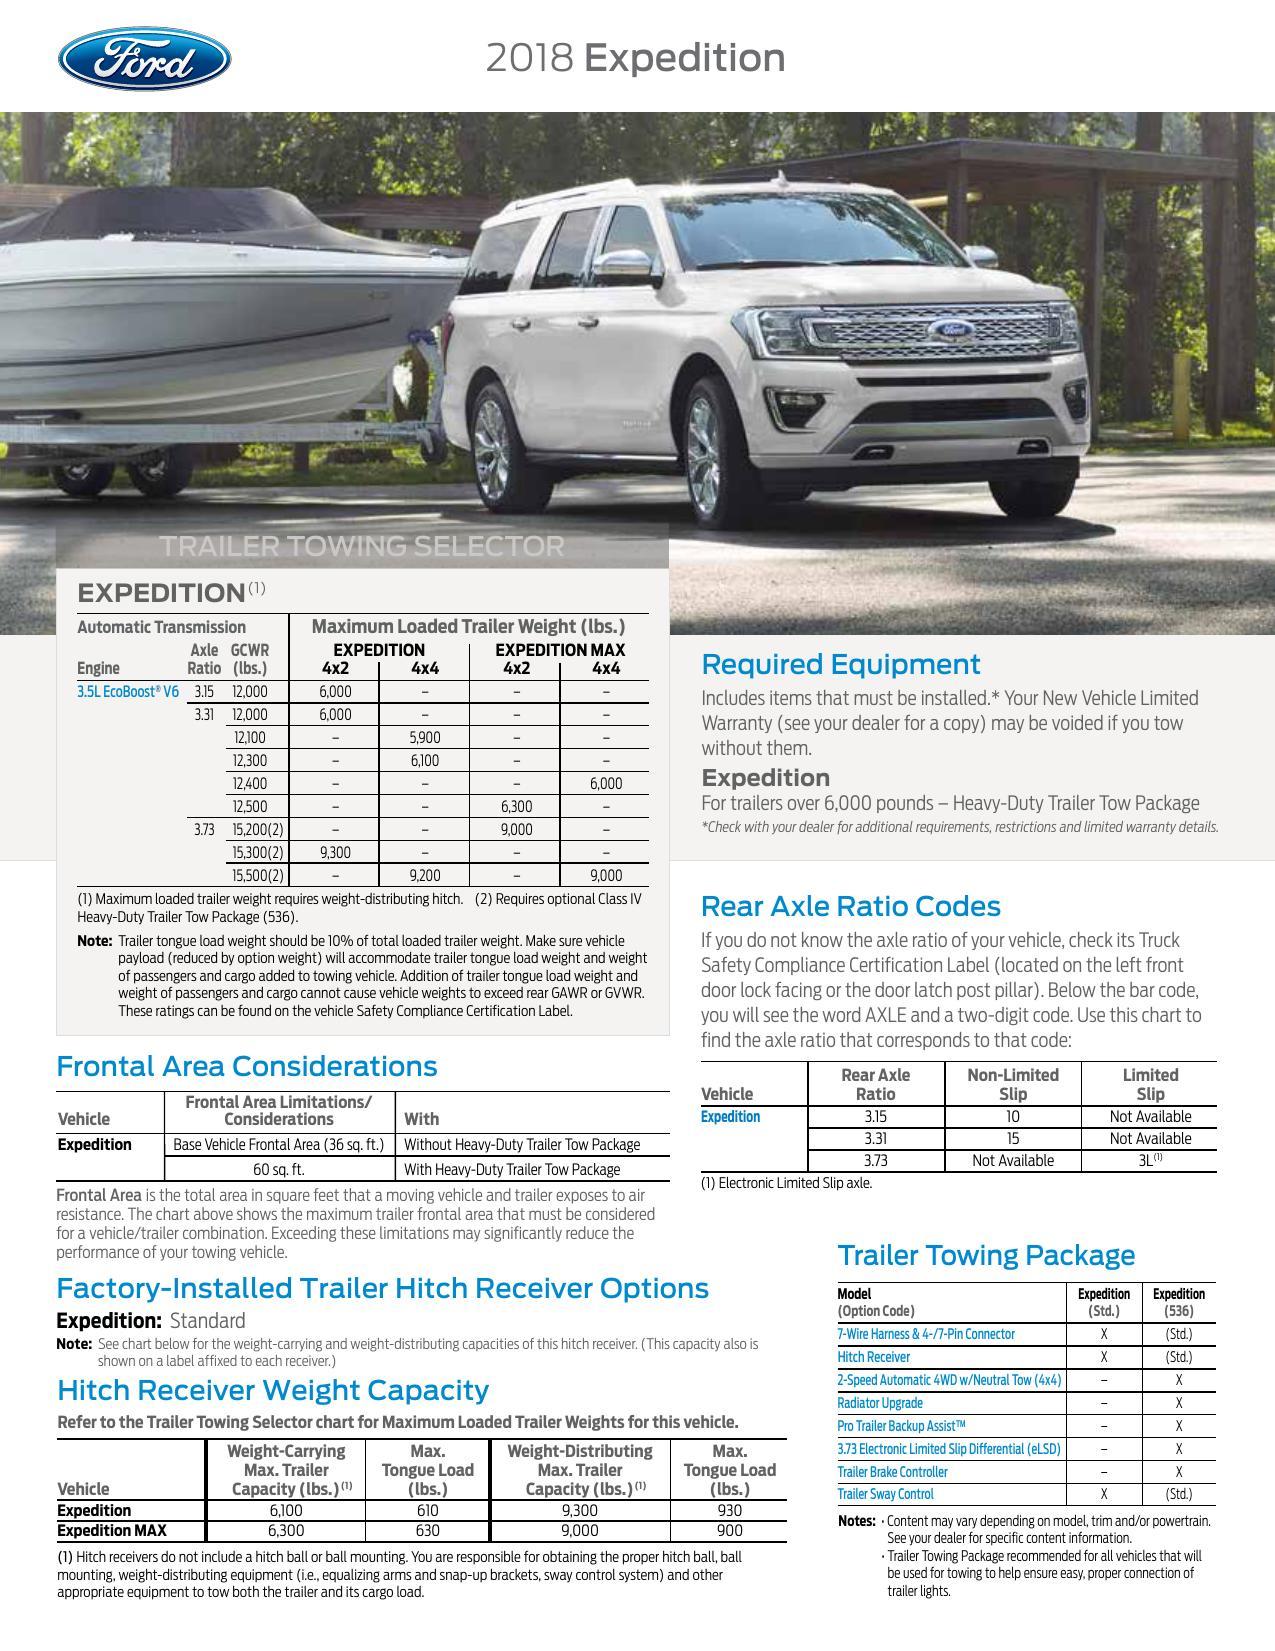 2018-expedition-owners-manual.pdf